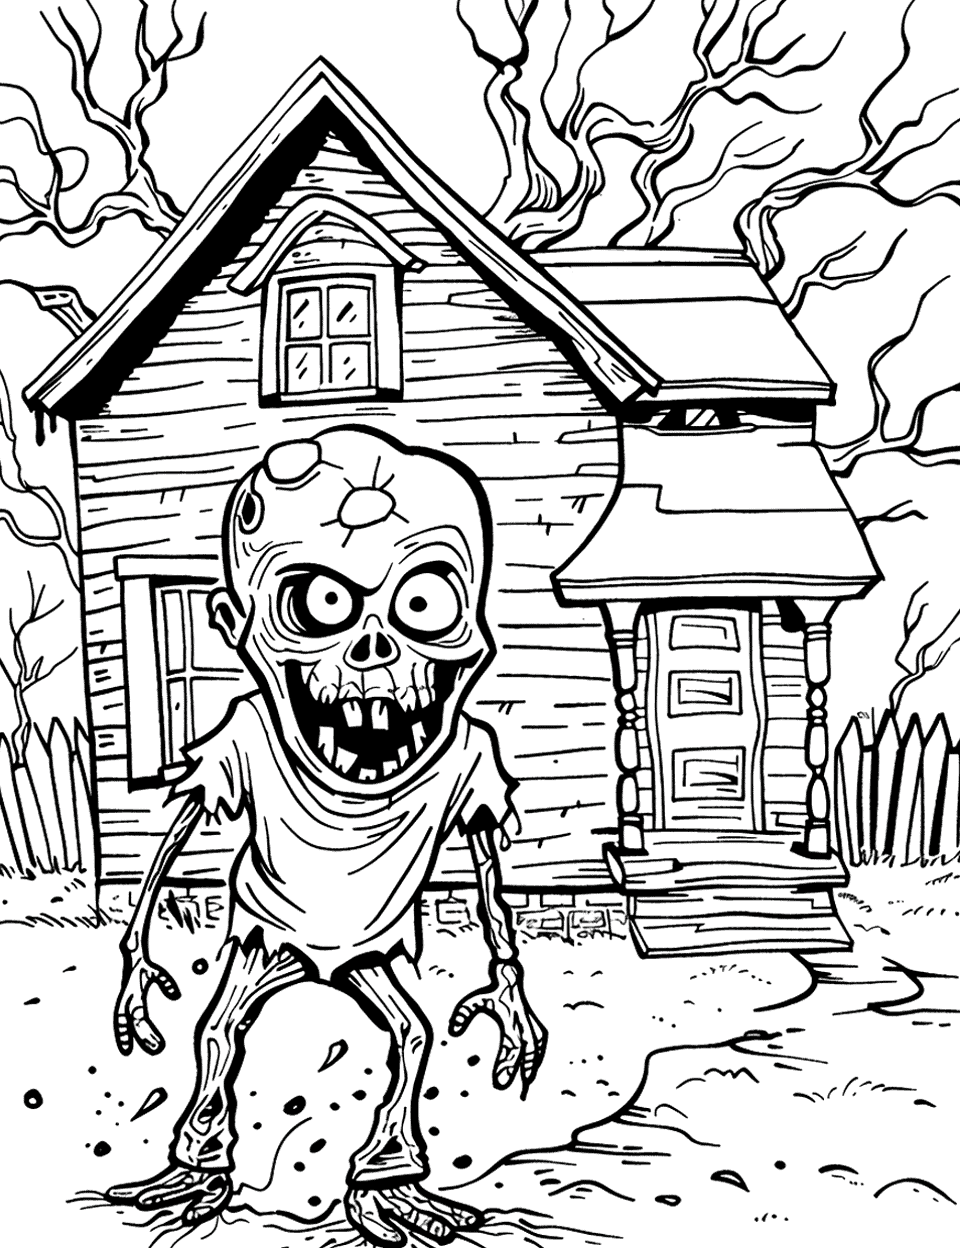 Horror Movie Zombie Coloring Page - A scene mimicking a classic horror movie with a zombie in front of a house.